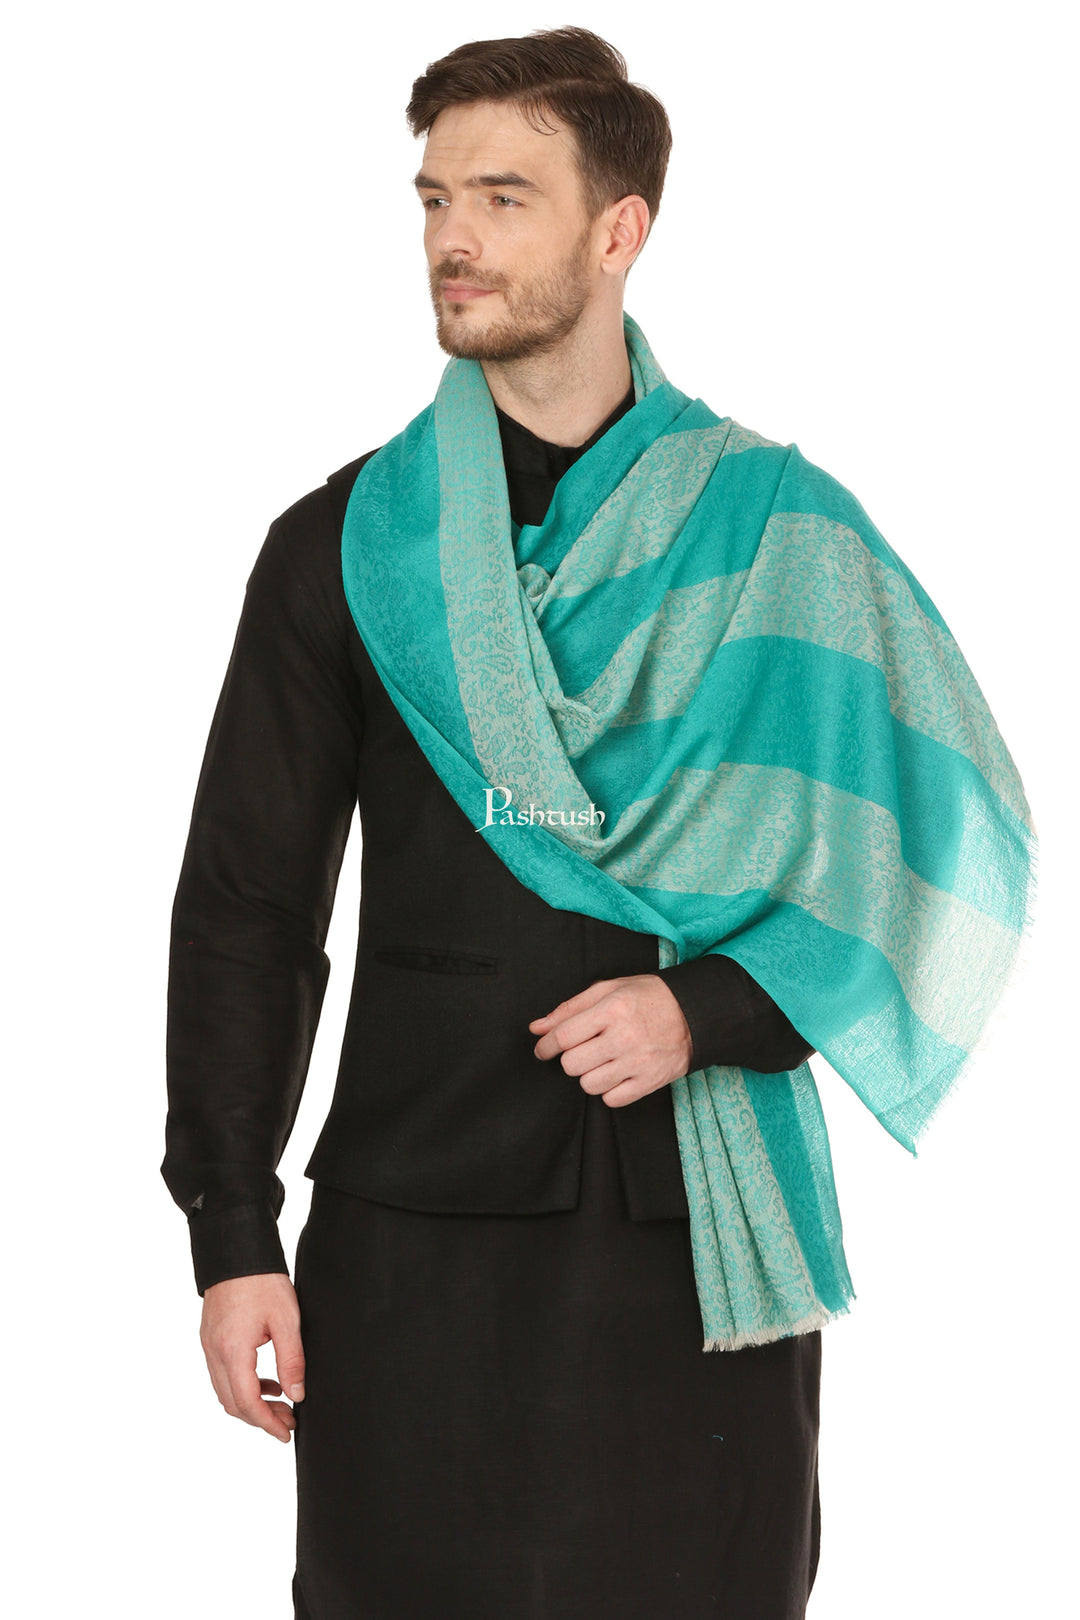 Pashtush India Gift Pack Pashtush His And Her Gift Set Of Striped Design Stoles With Premium Gift Box Packaging, Sea Green and Black